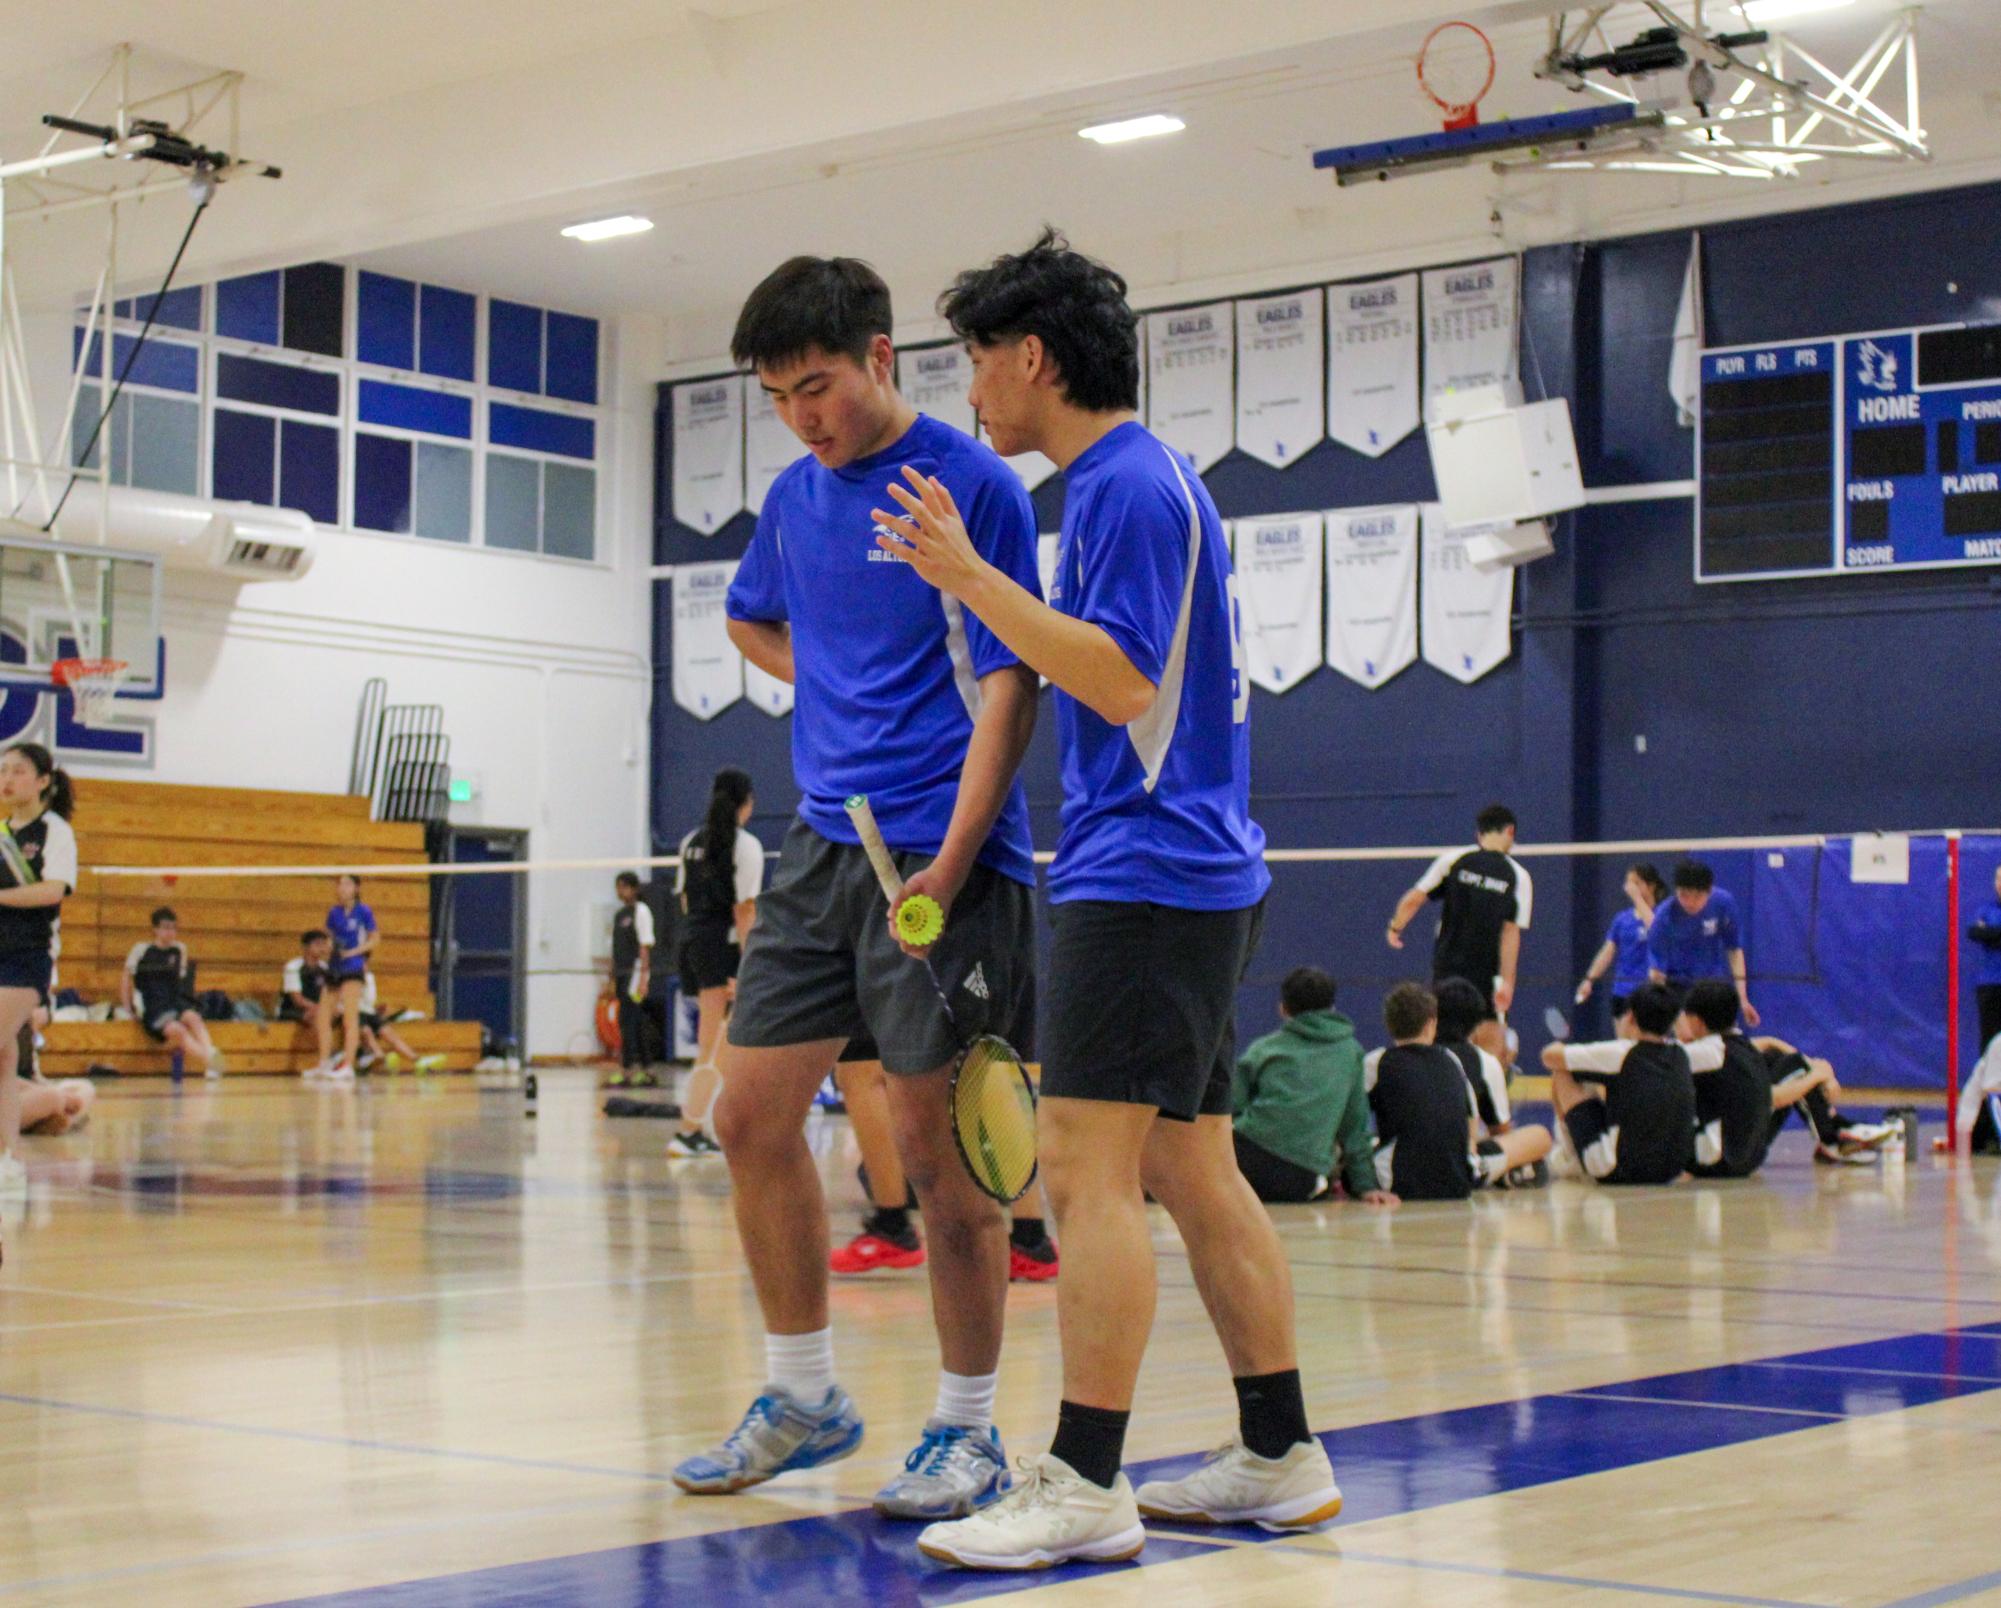 Los Altos High School Badminton Loses First Season Game to Los Gatos with Player Chatter During Match